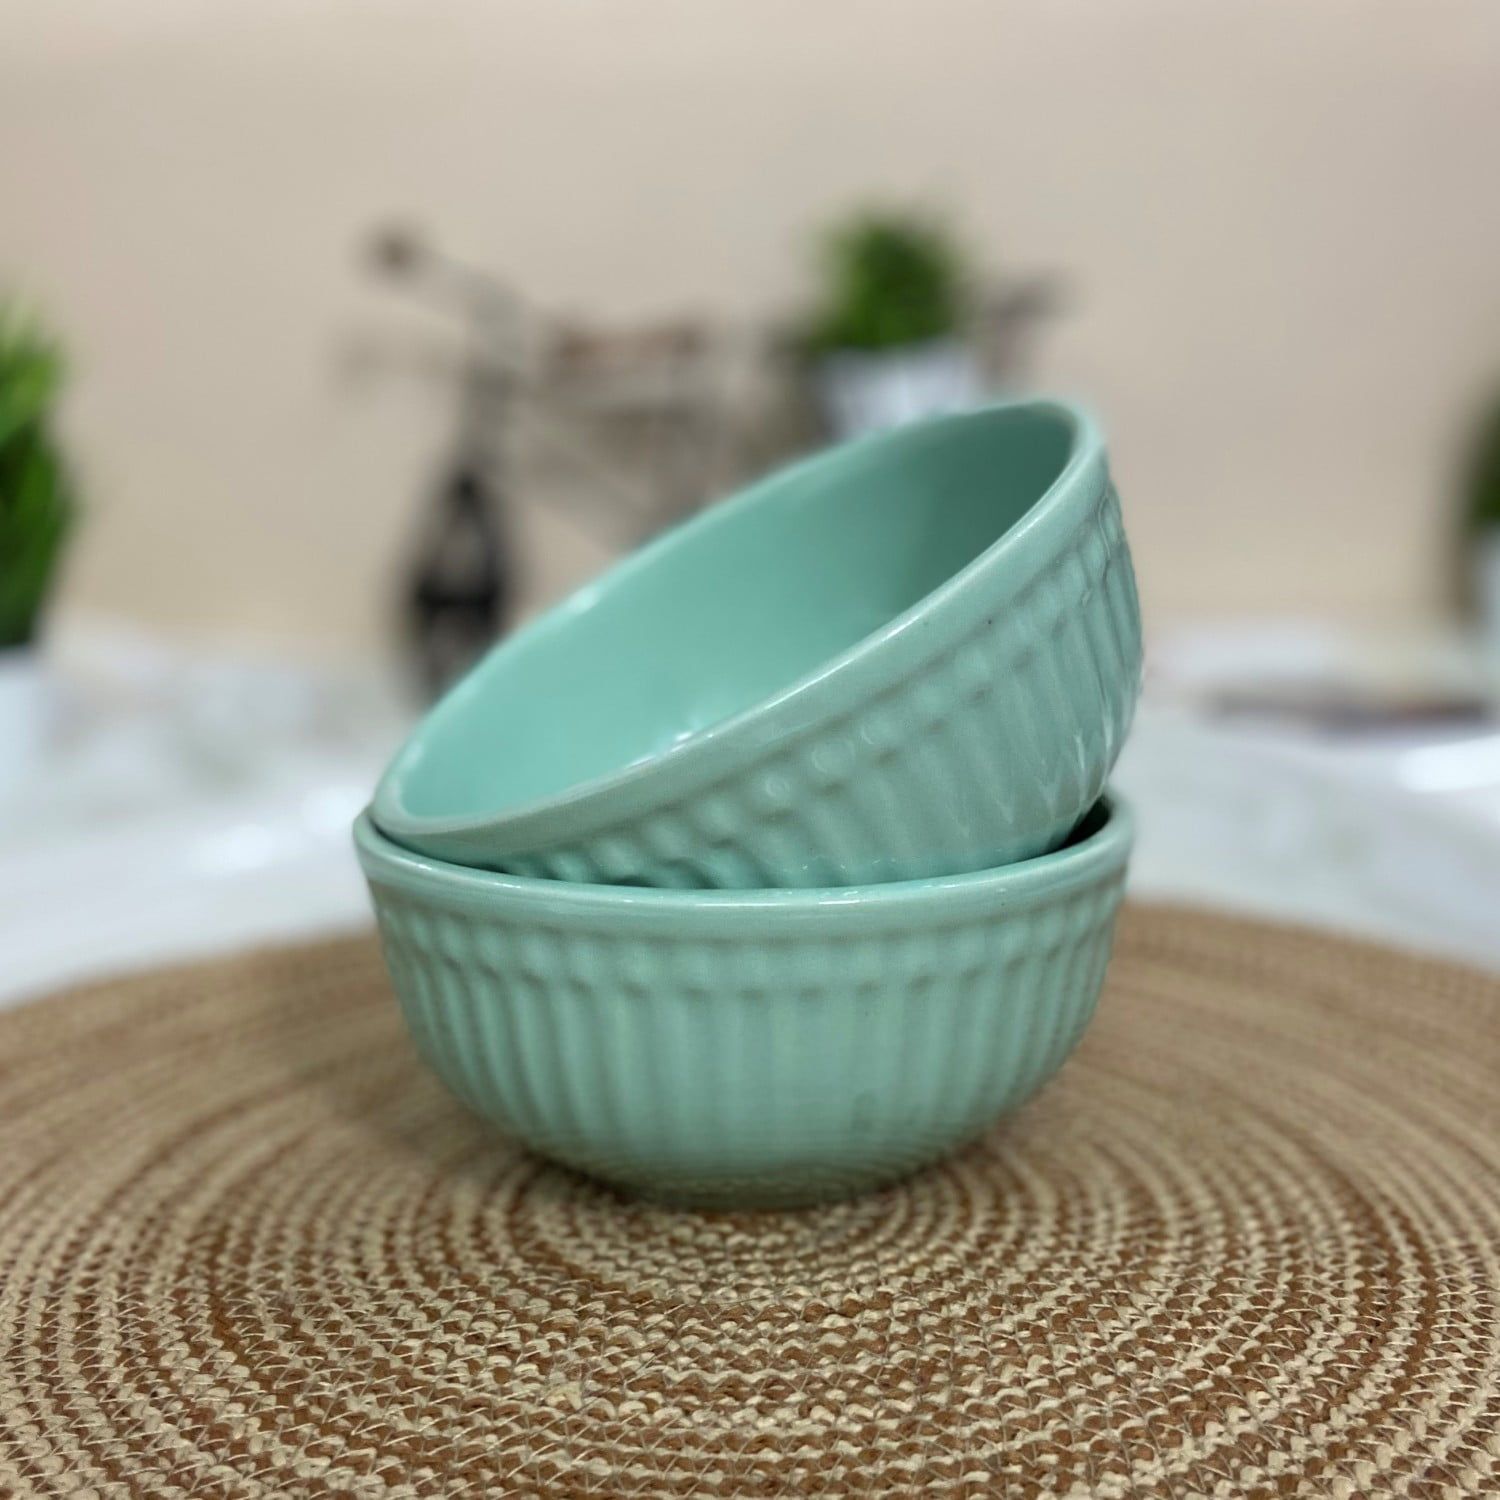 Ceramic Dining Green Linear Shaped Ceramic Soup/Cereal Bowls- Set of 2